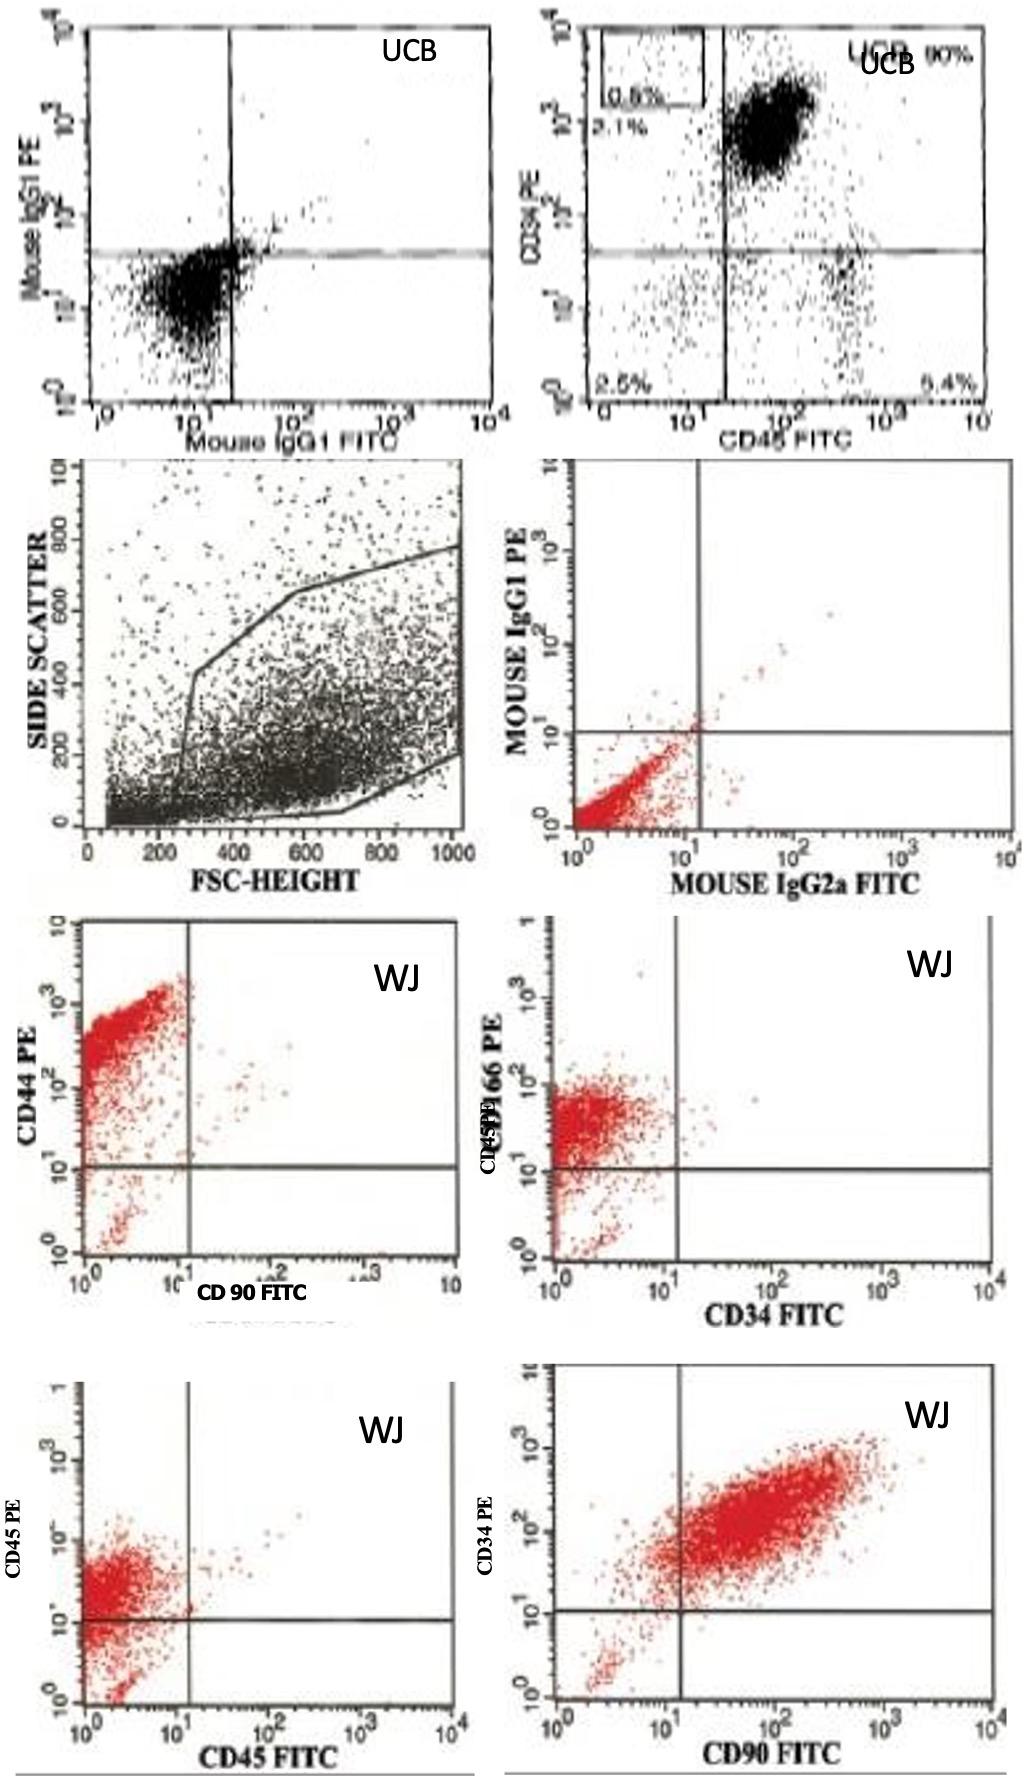 Isolation of stem cell populations from wharton’s jelly sections of umbilical cord and comparison analysis with cord blood stem cells